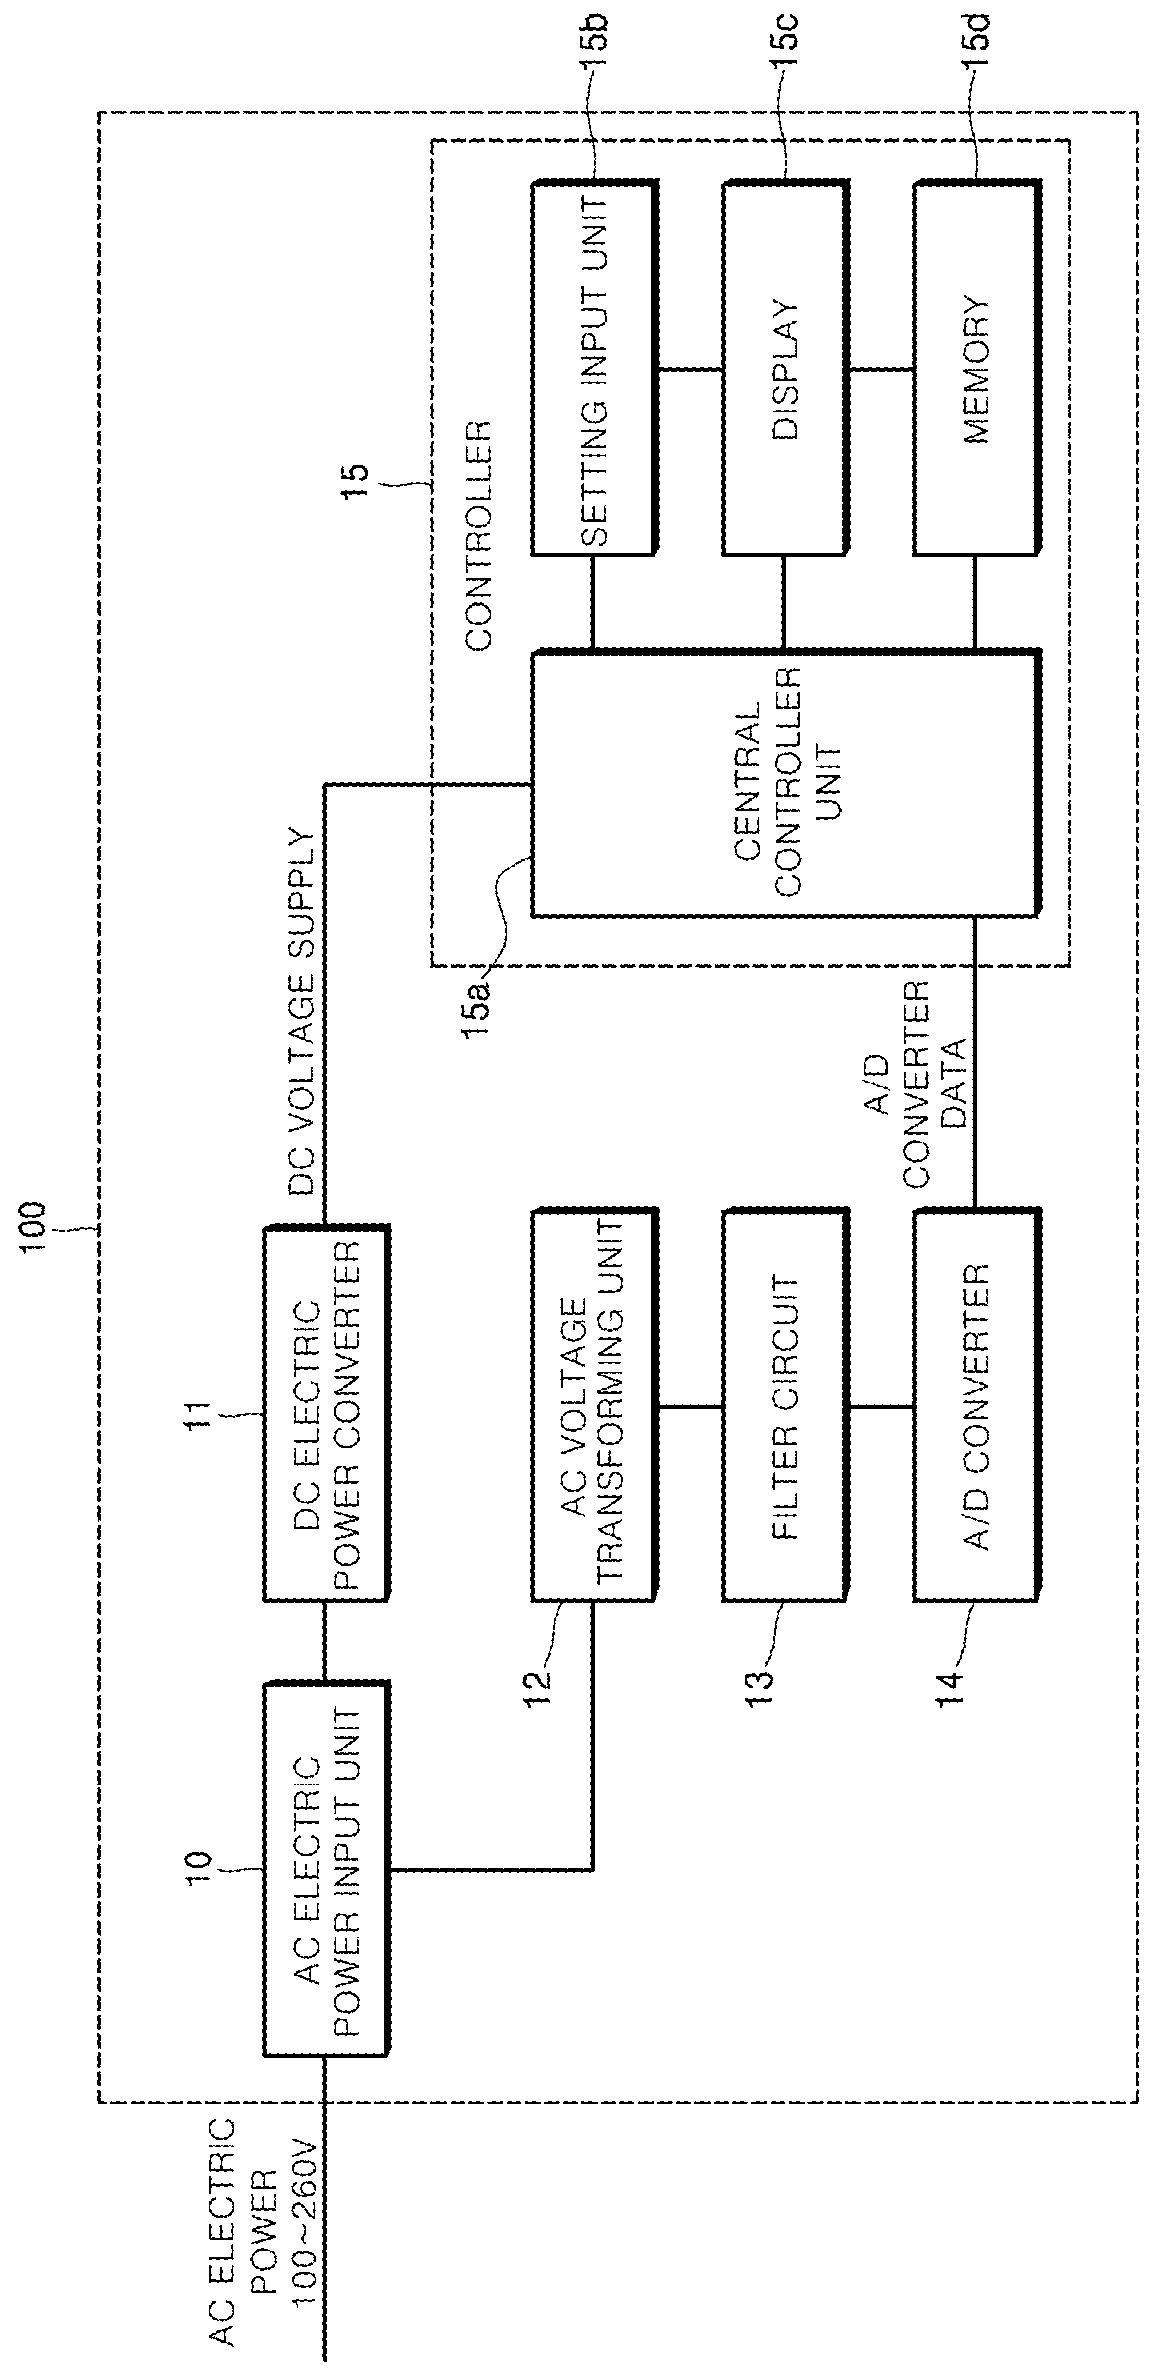 Power failure monitoring device of digital protection relay